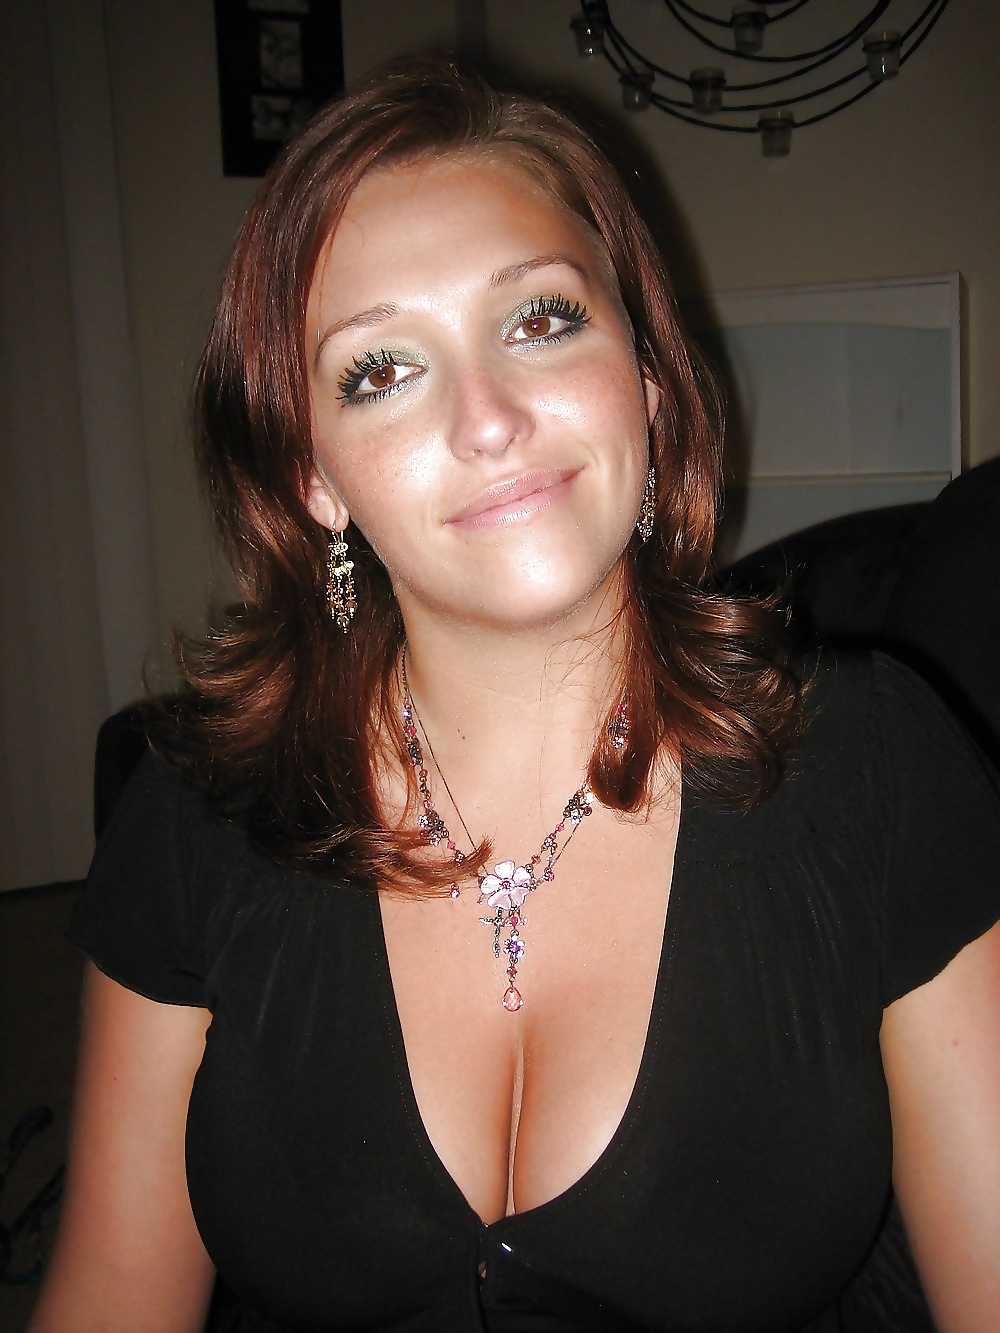 MILF with big tits (Anyone what her name is?) #33391183